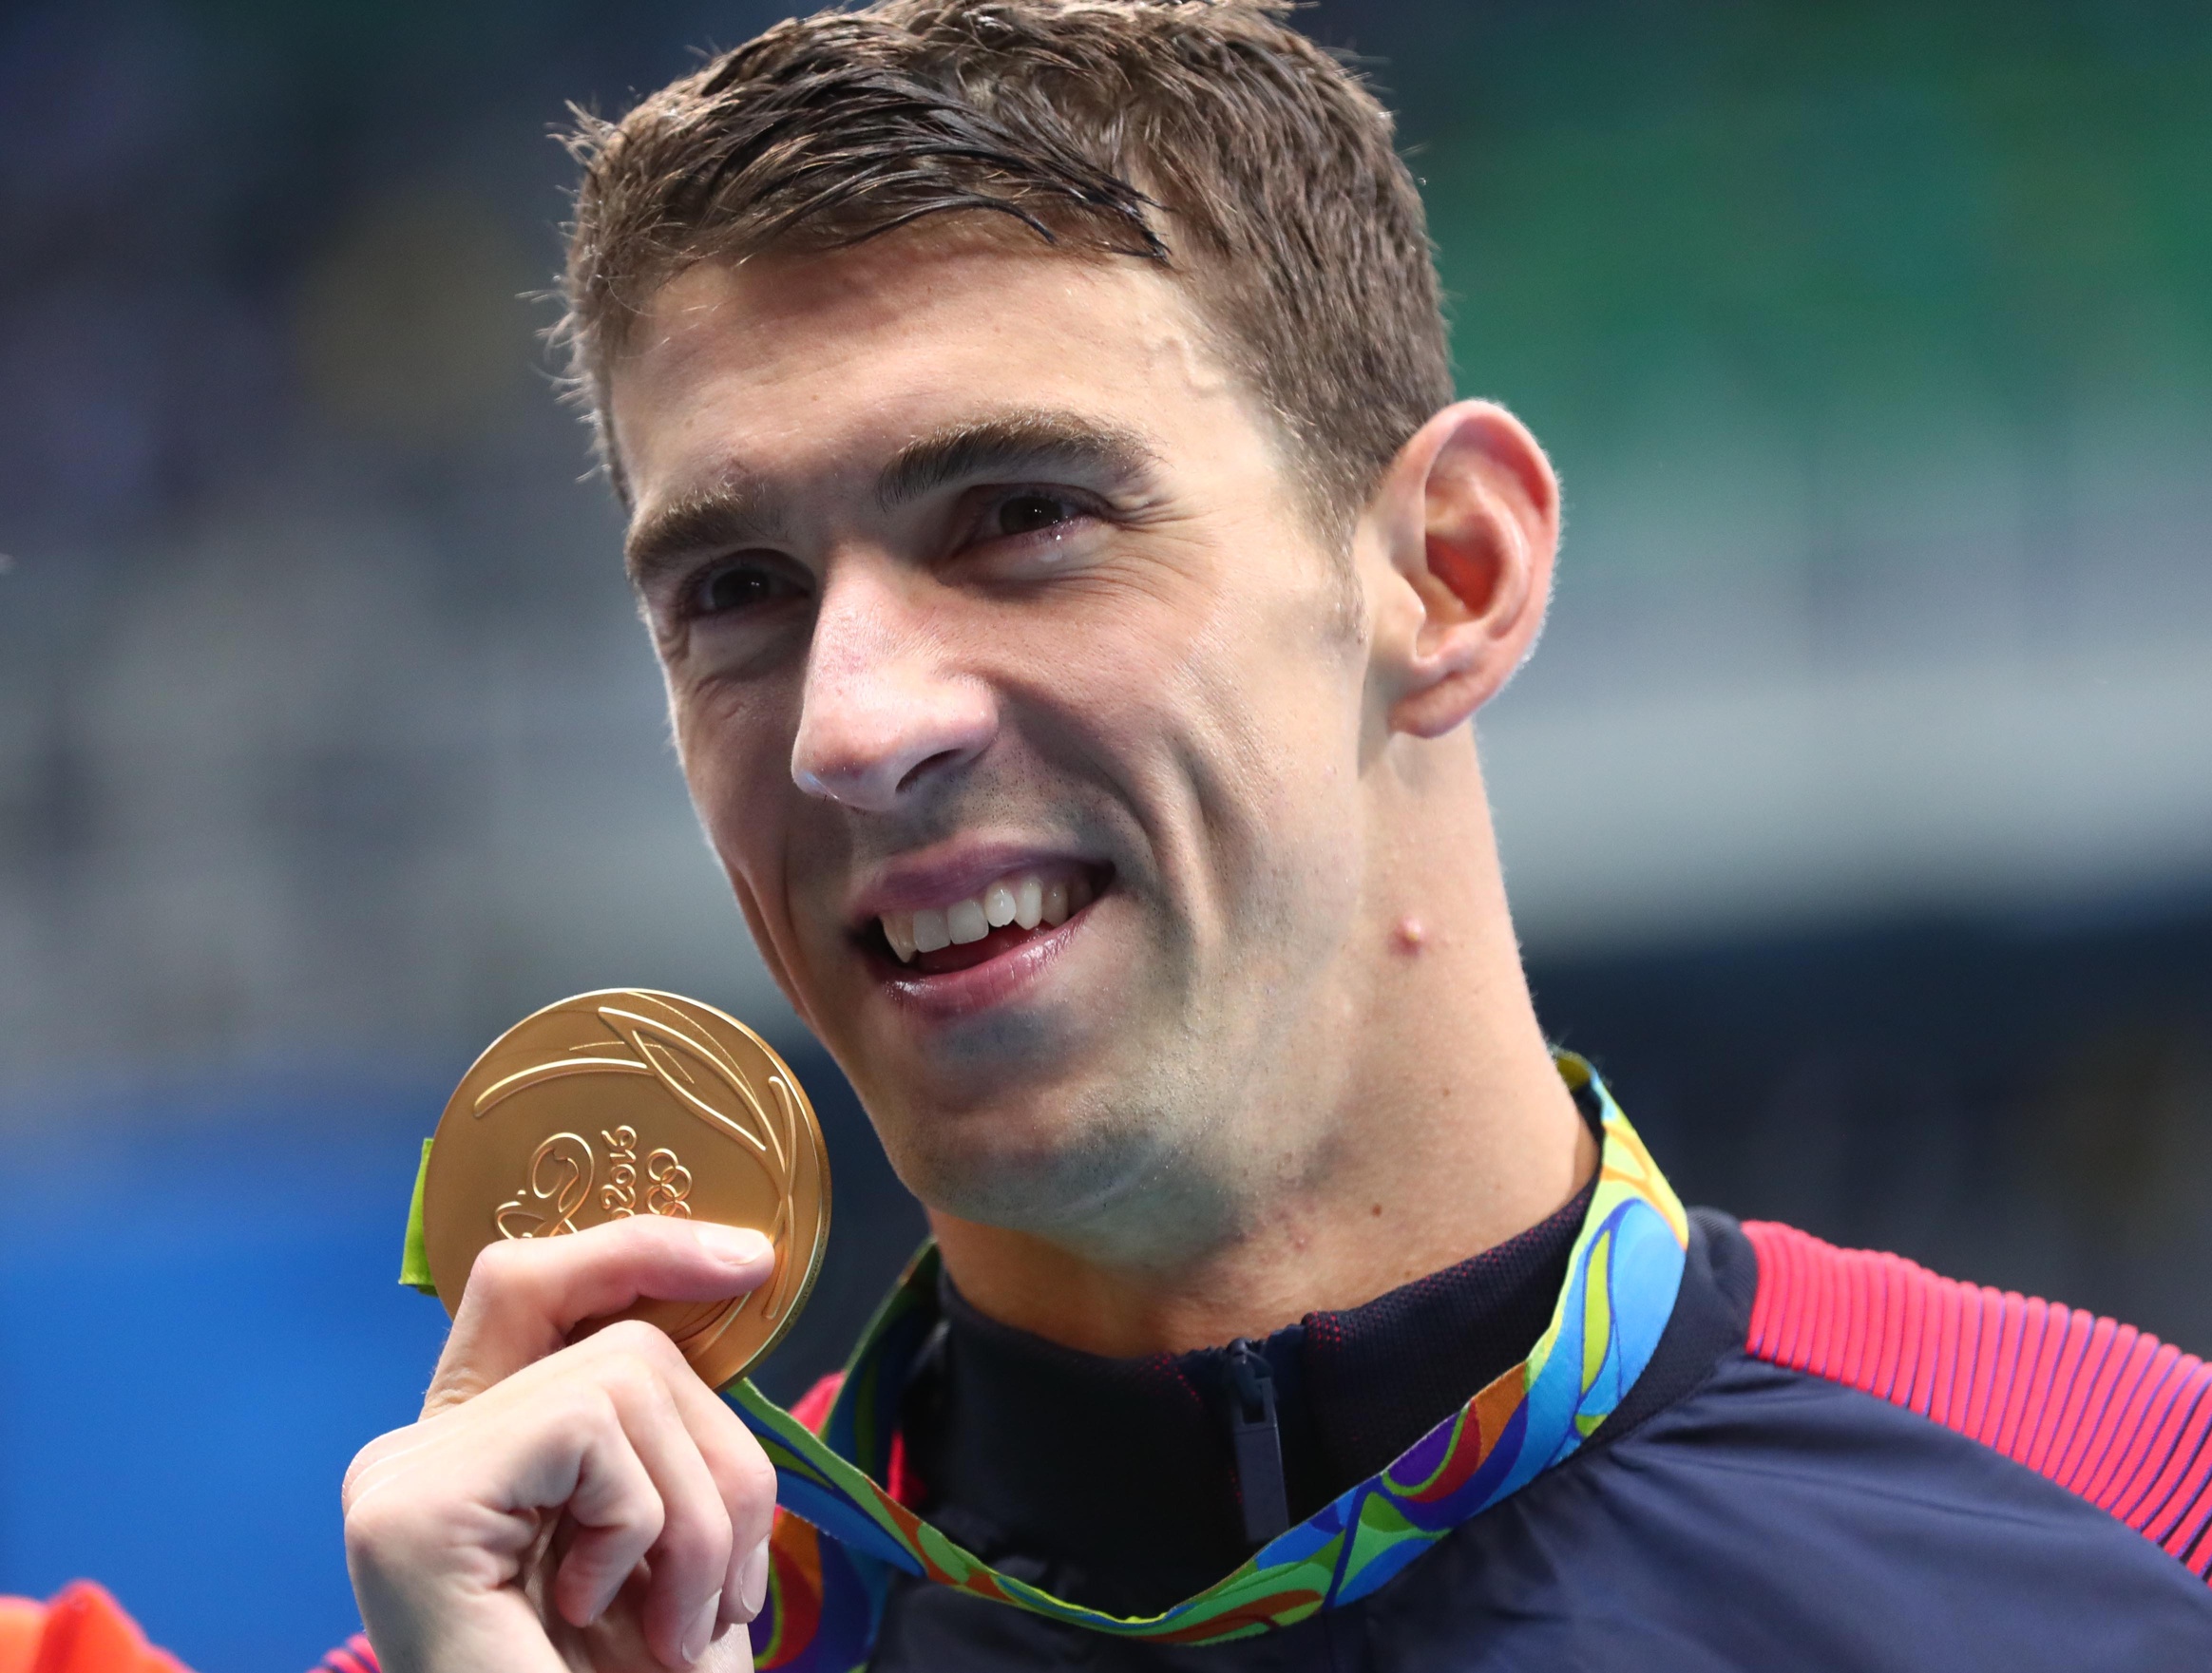 The most medals. Michael Phelps USA.